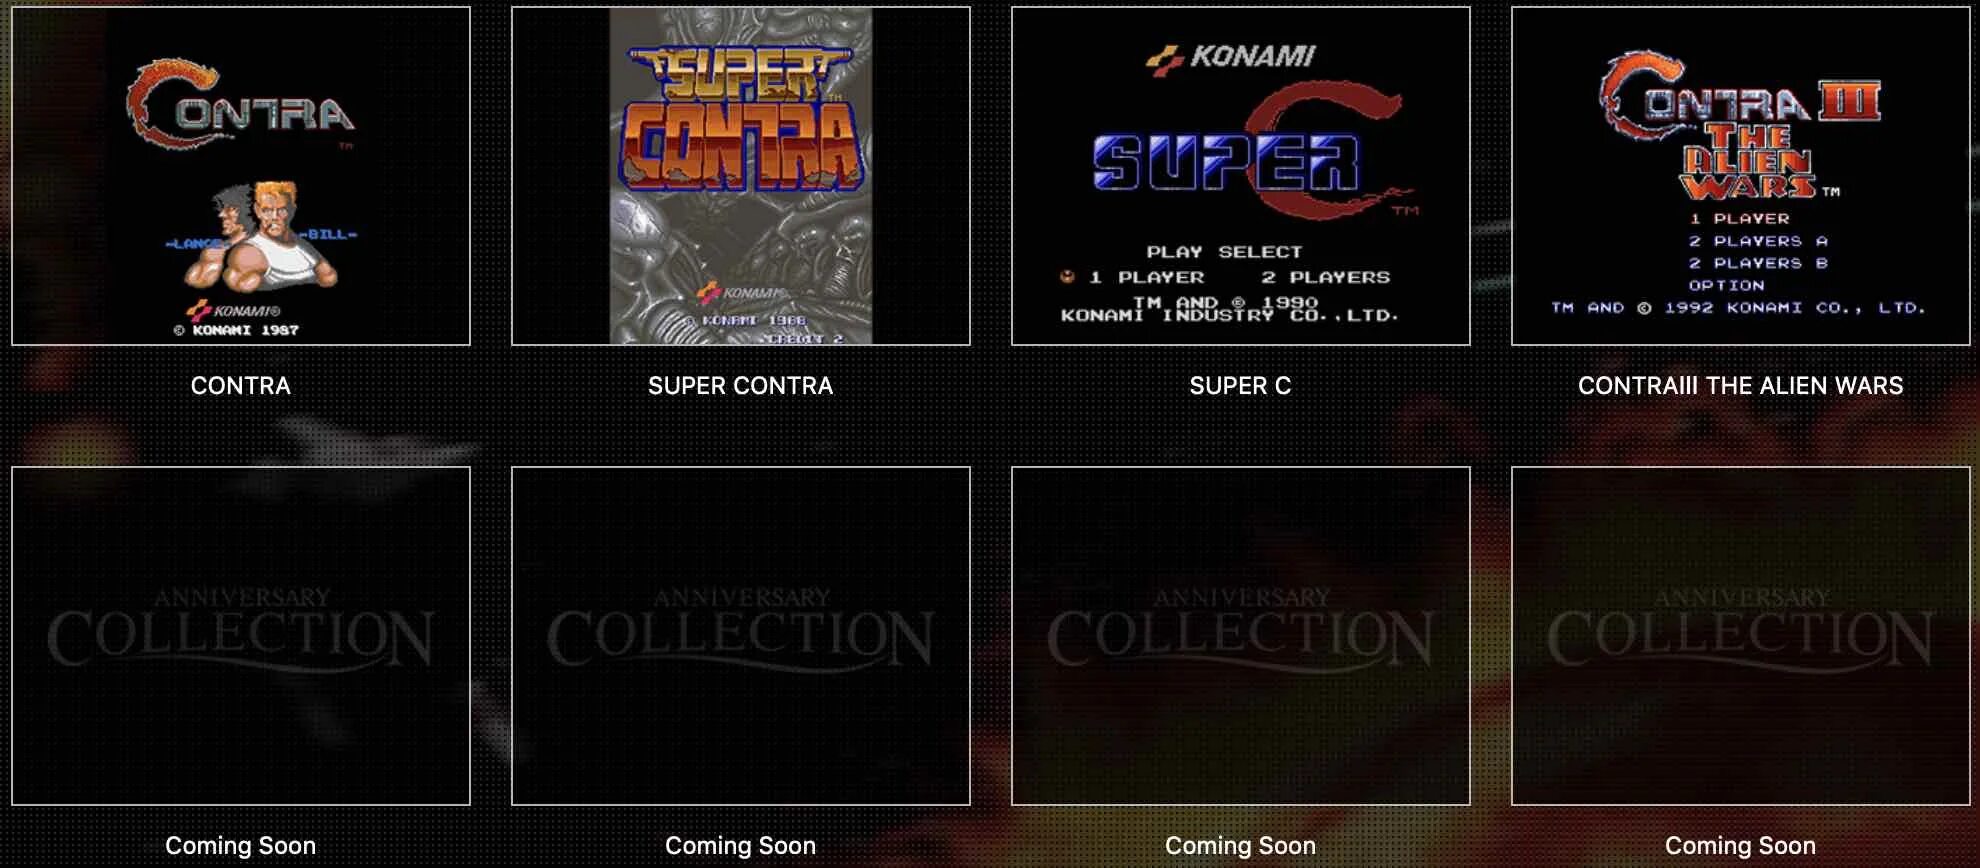 Contra Anniversary collection. Contra Anniversary collection коллекционное. Contra Anniversary collection Switch. Contra Anniversary collection Nintendo Switch. Game list is